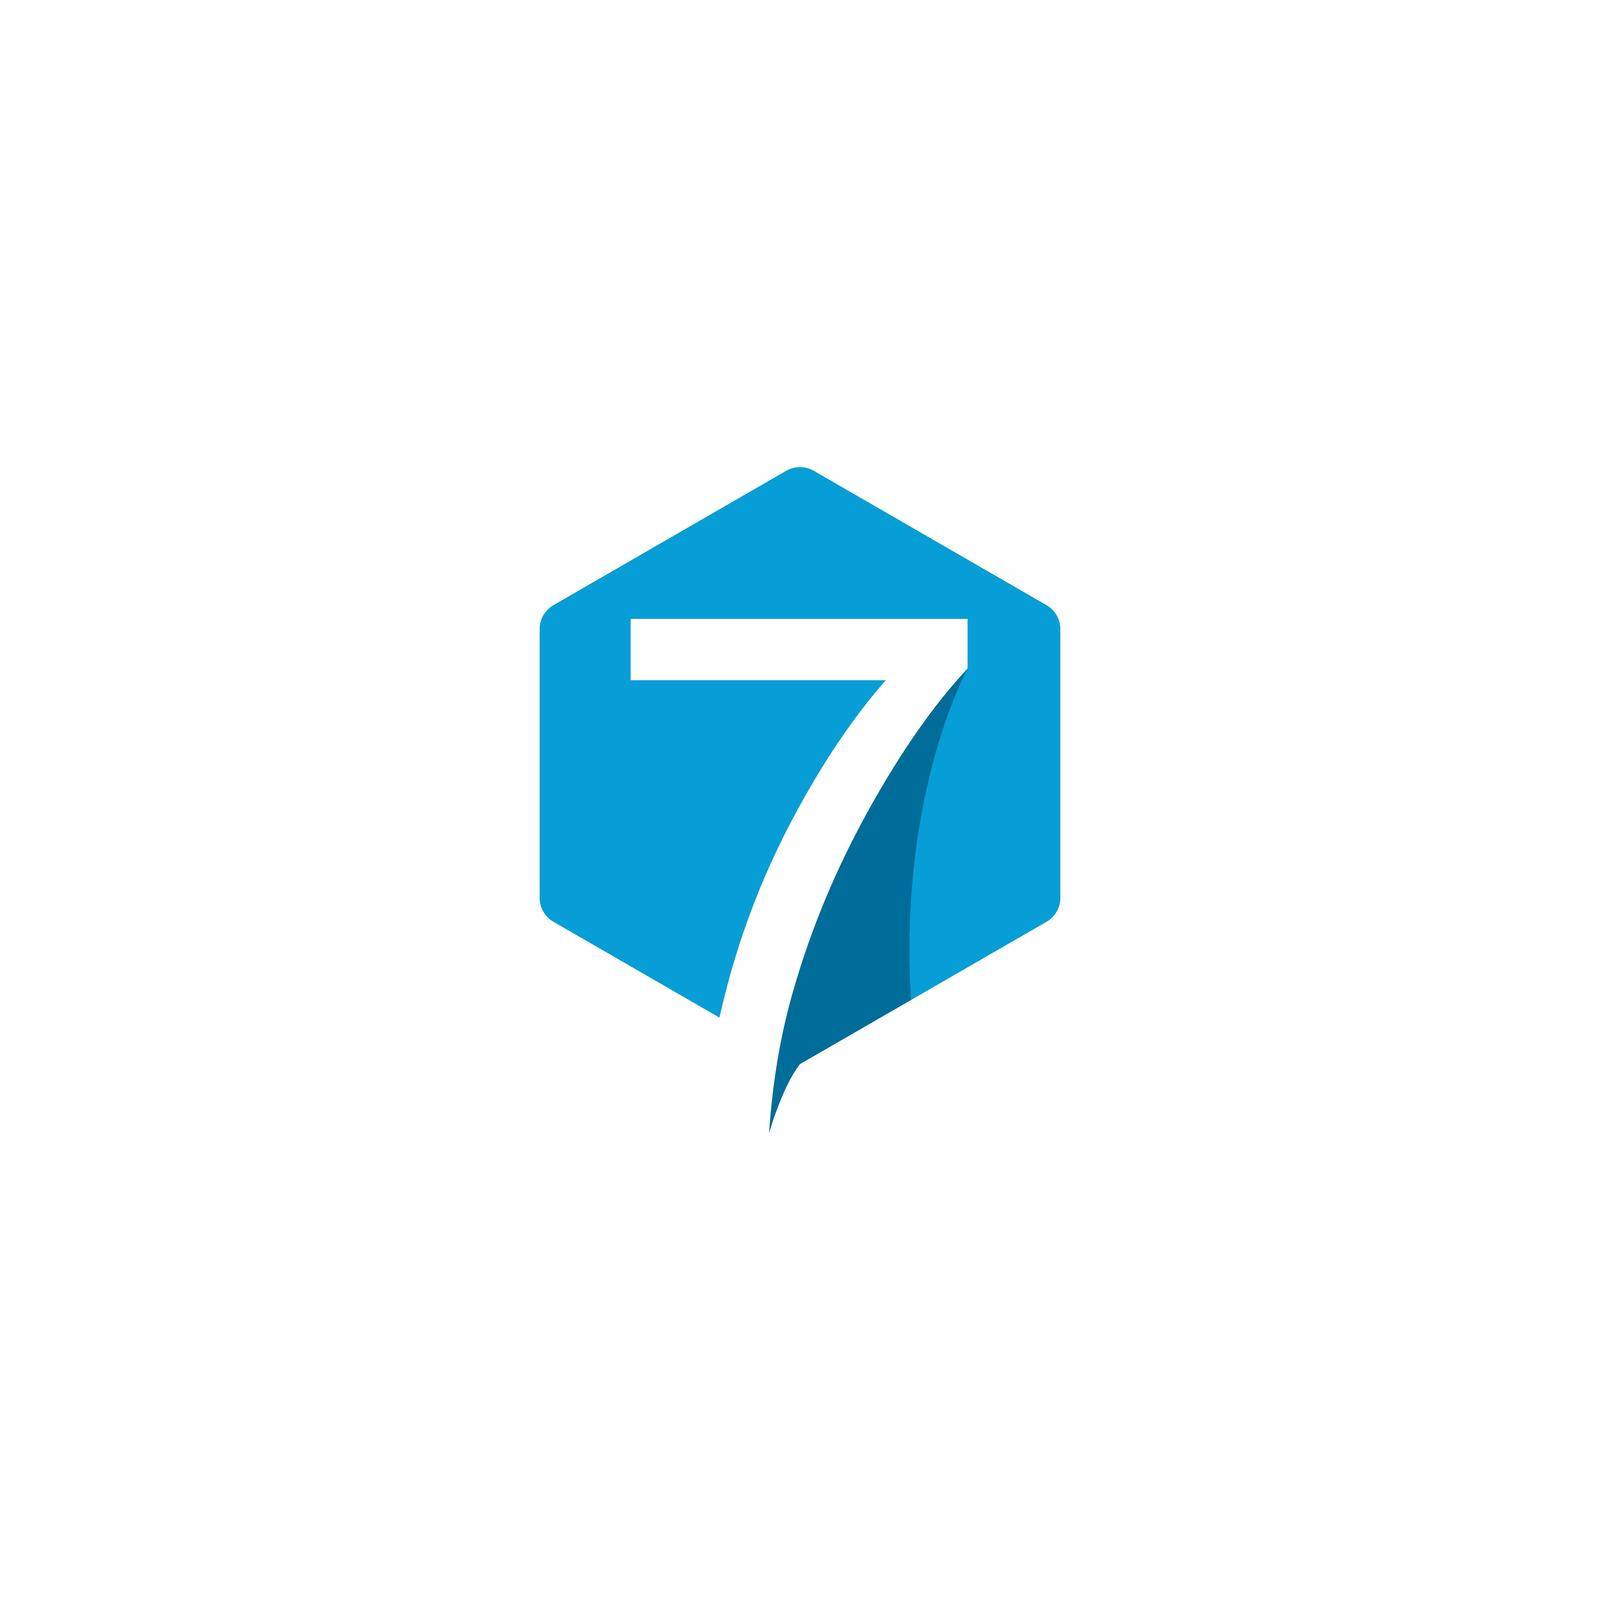 sign of number 7 logo vector icon illustration by kosasihindra55